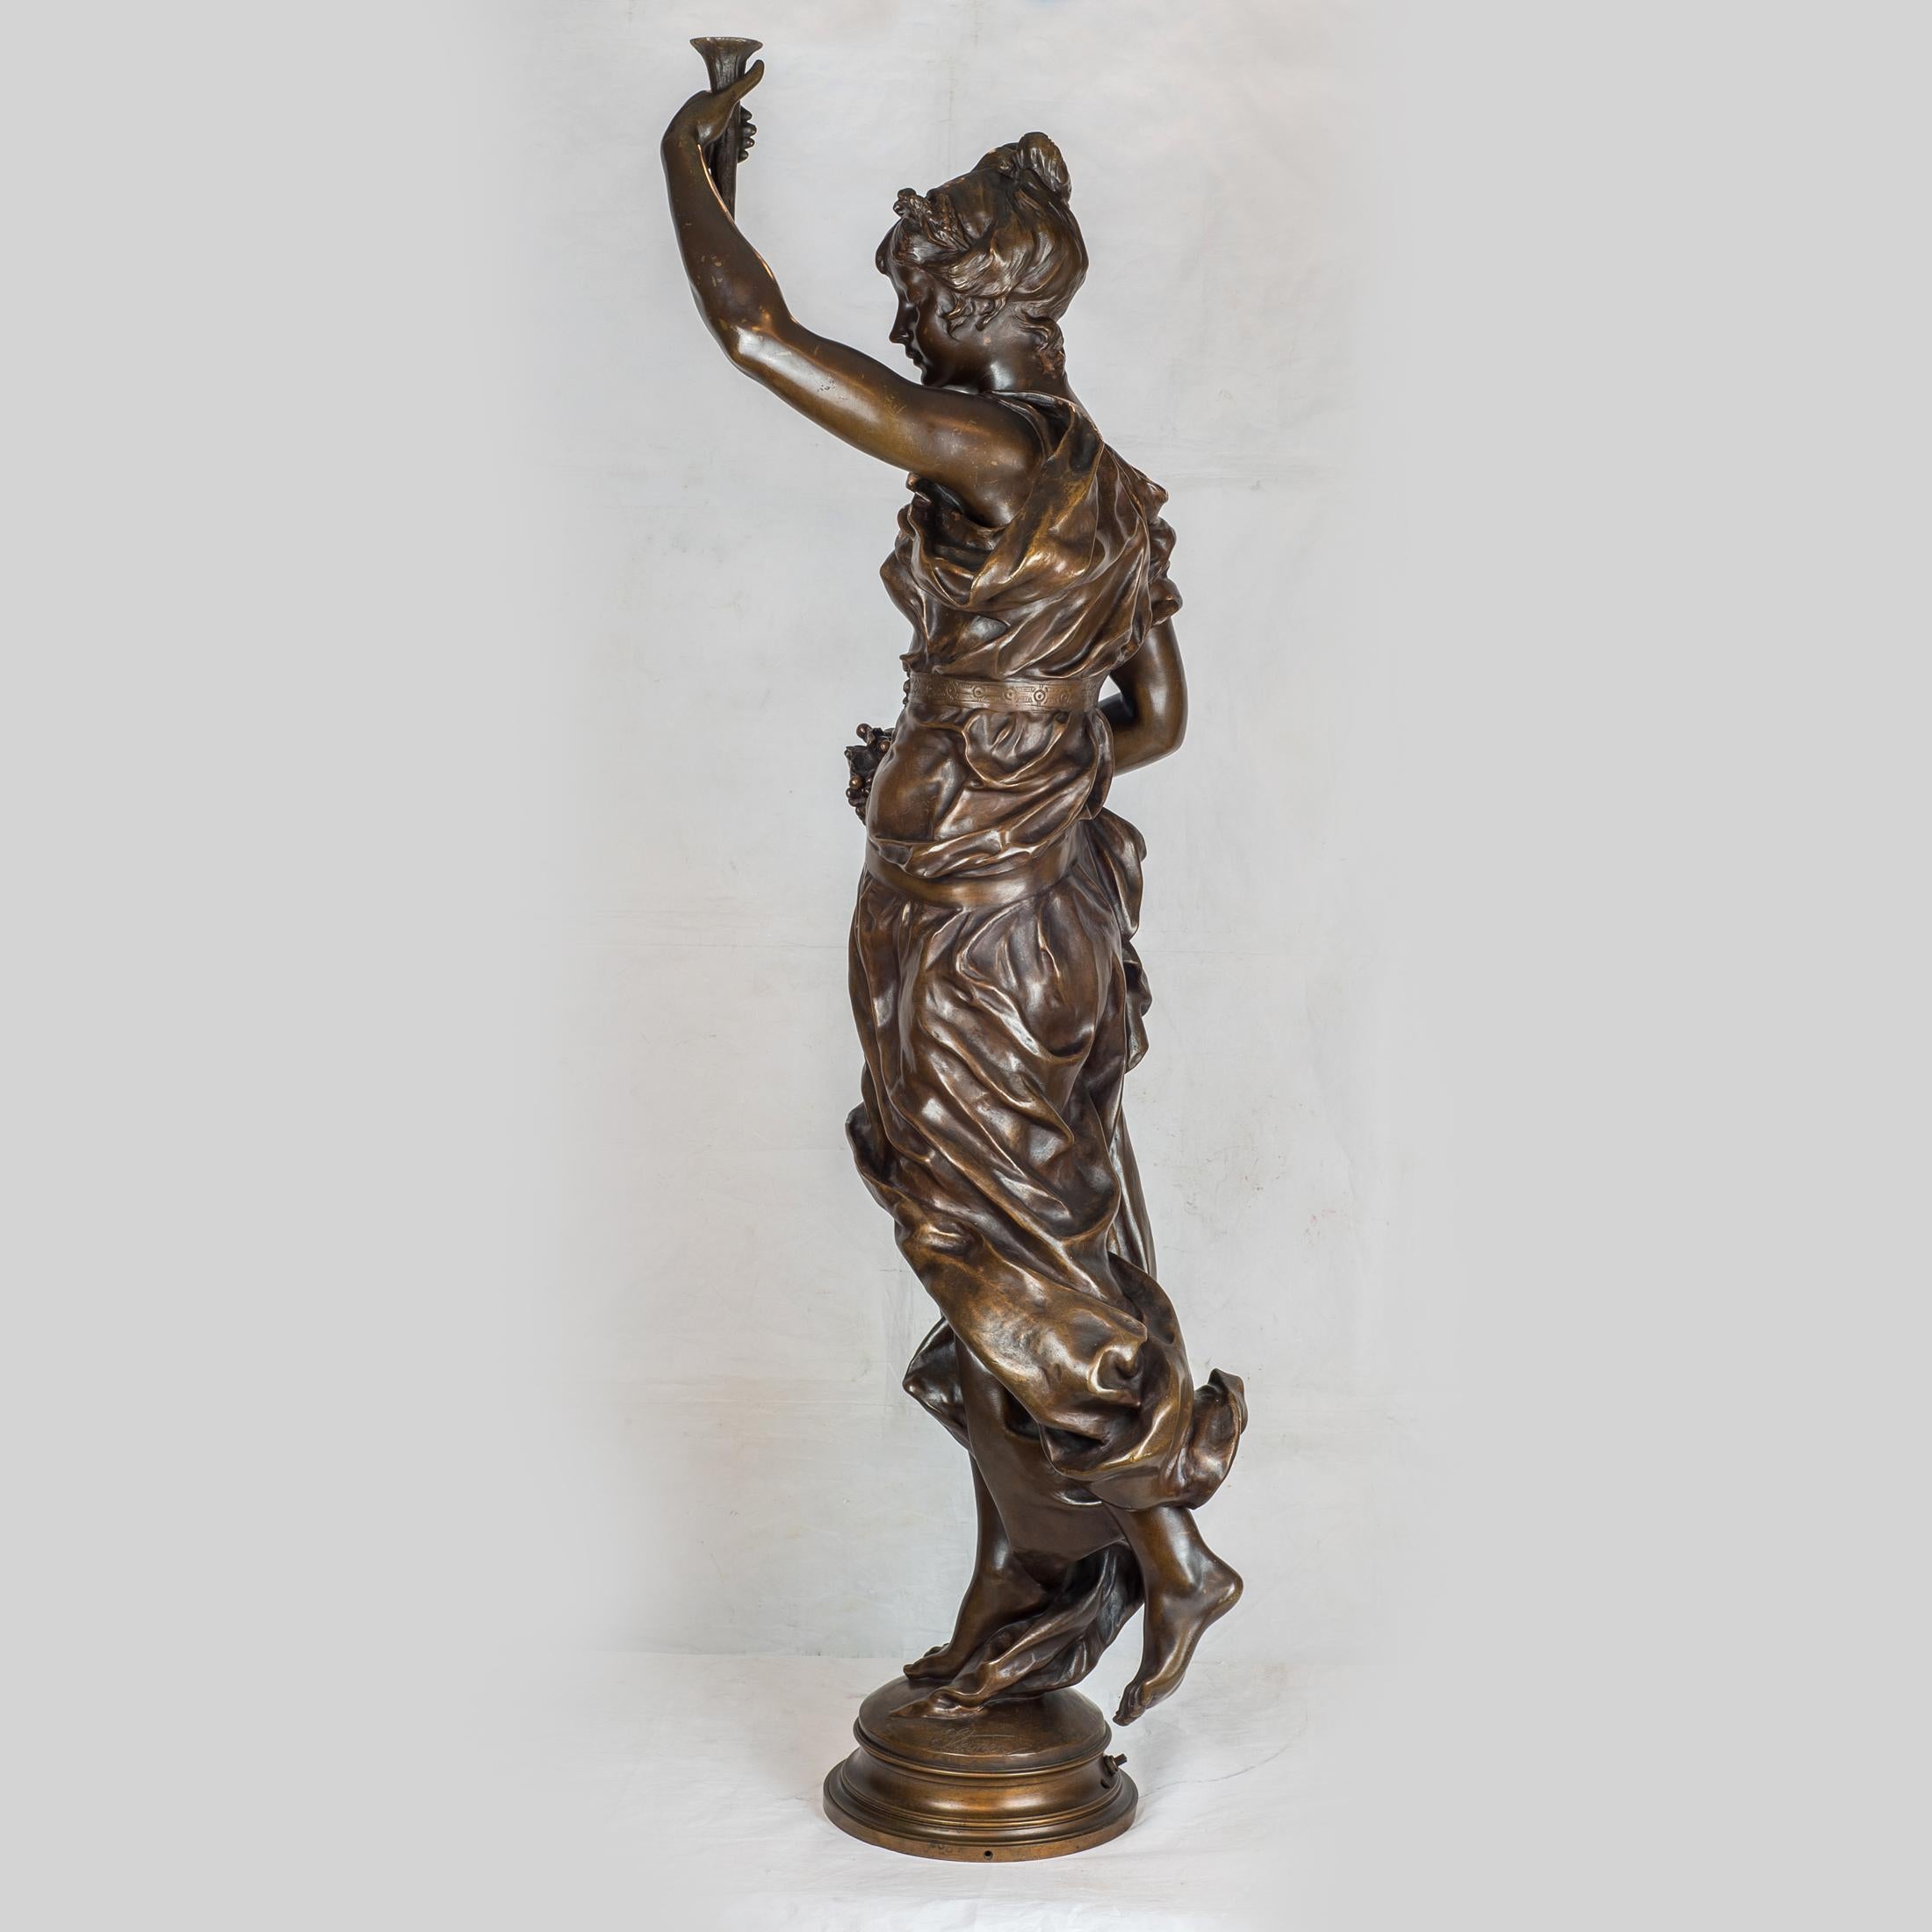 Finely casted patinated bronze figure of a standing young maiden dressed in a classical gown with one hand raised and holding a torch.

Artist: Clément Léopold Steiner (1853-1899)
Origin: French
Date: 19th century
Dimension: 46 1/8 x 22 1/2 x